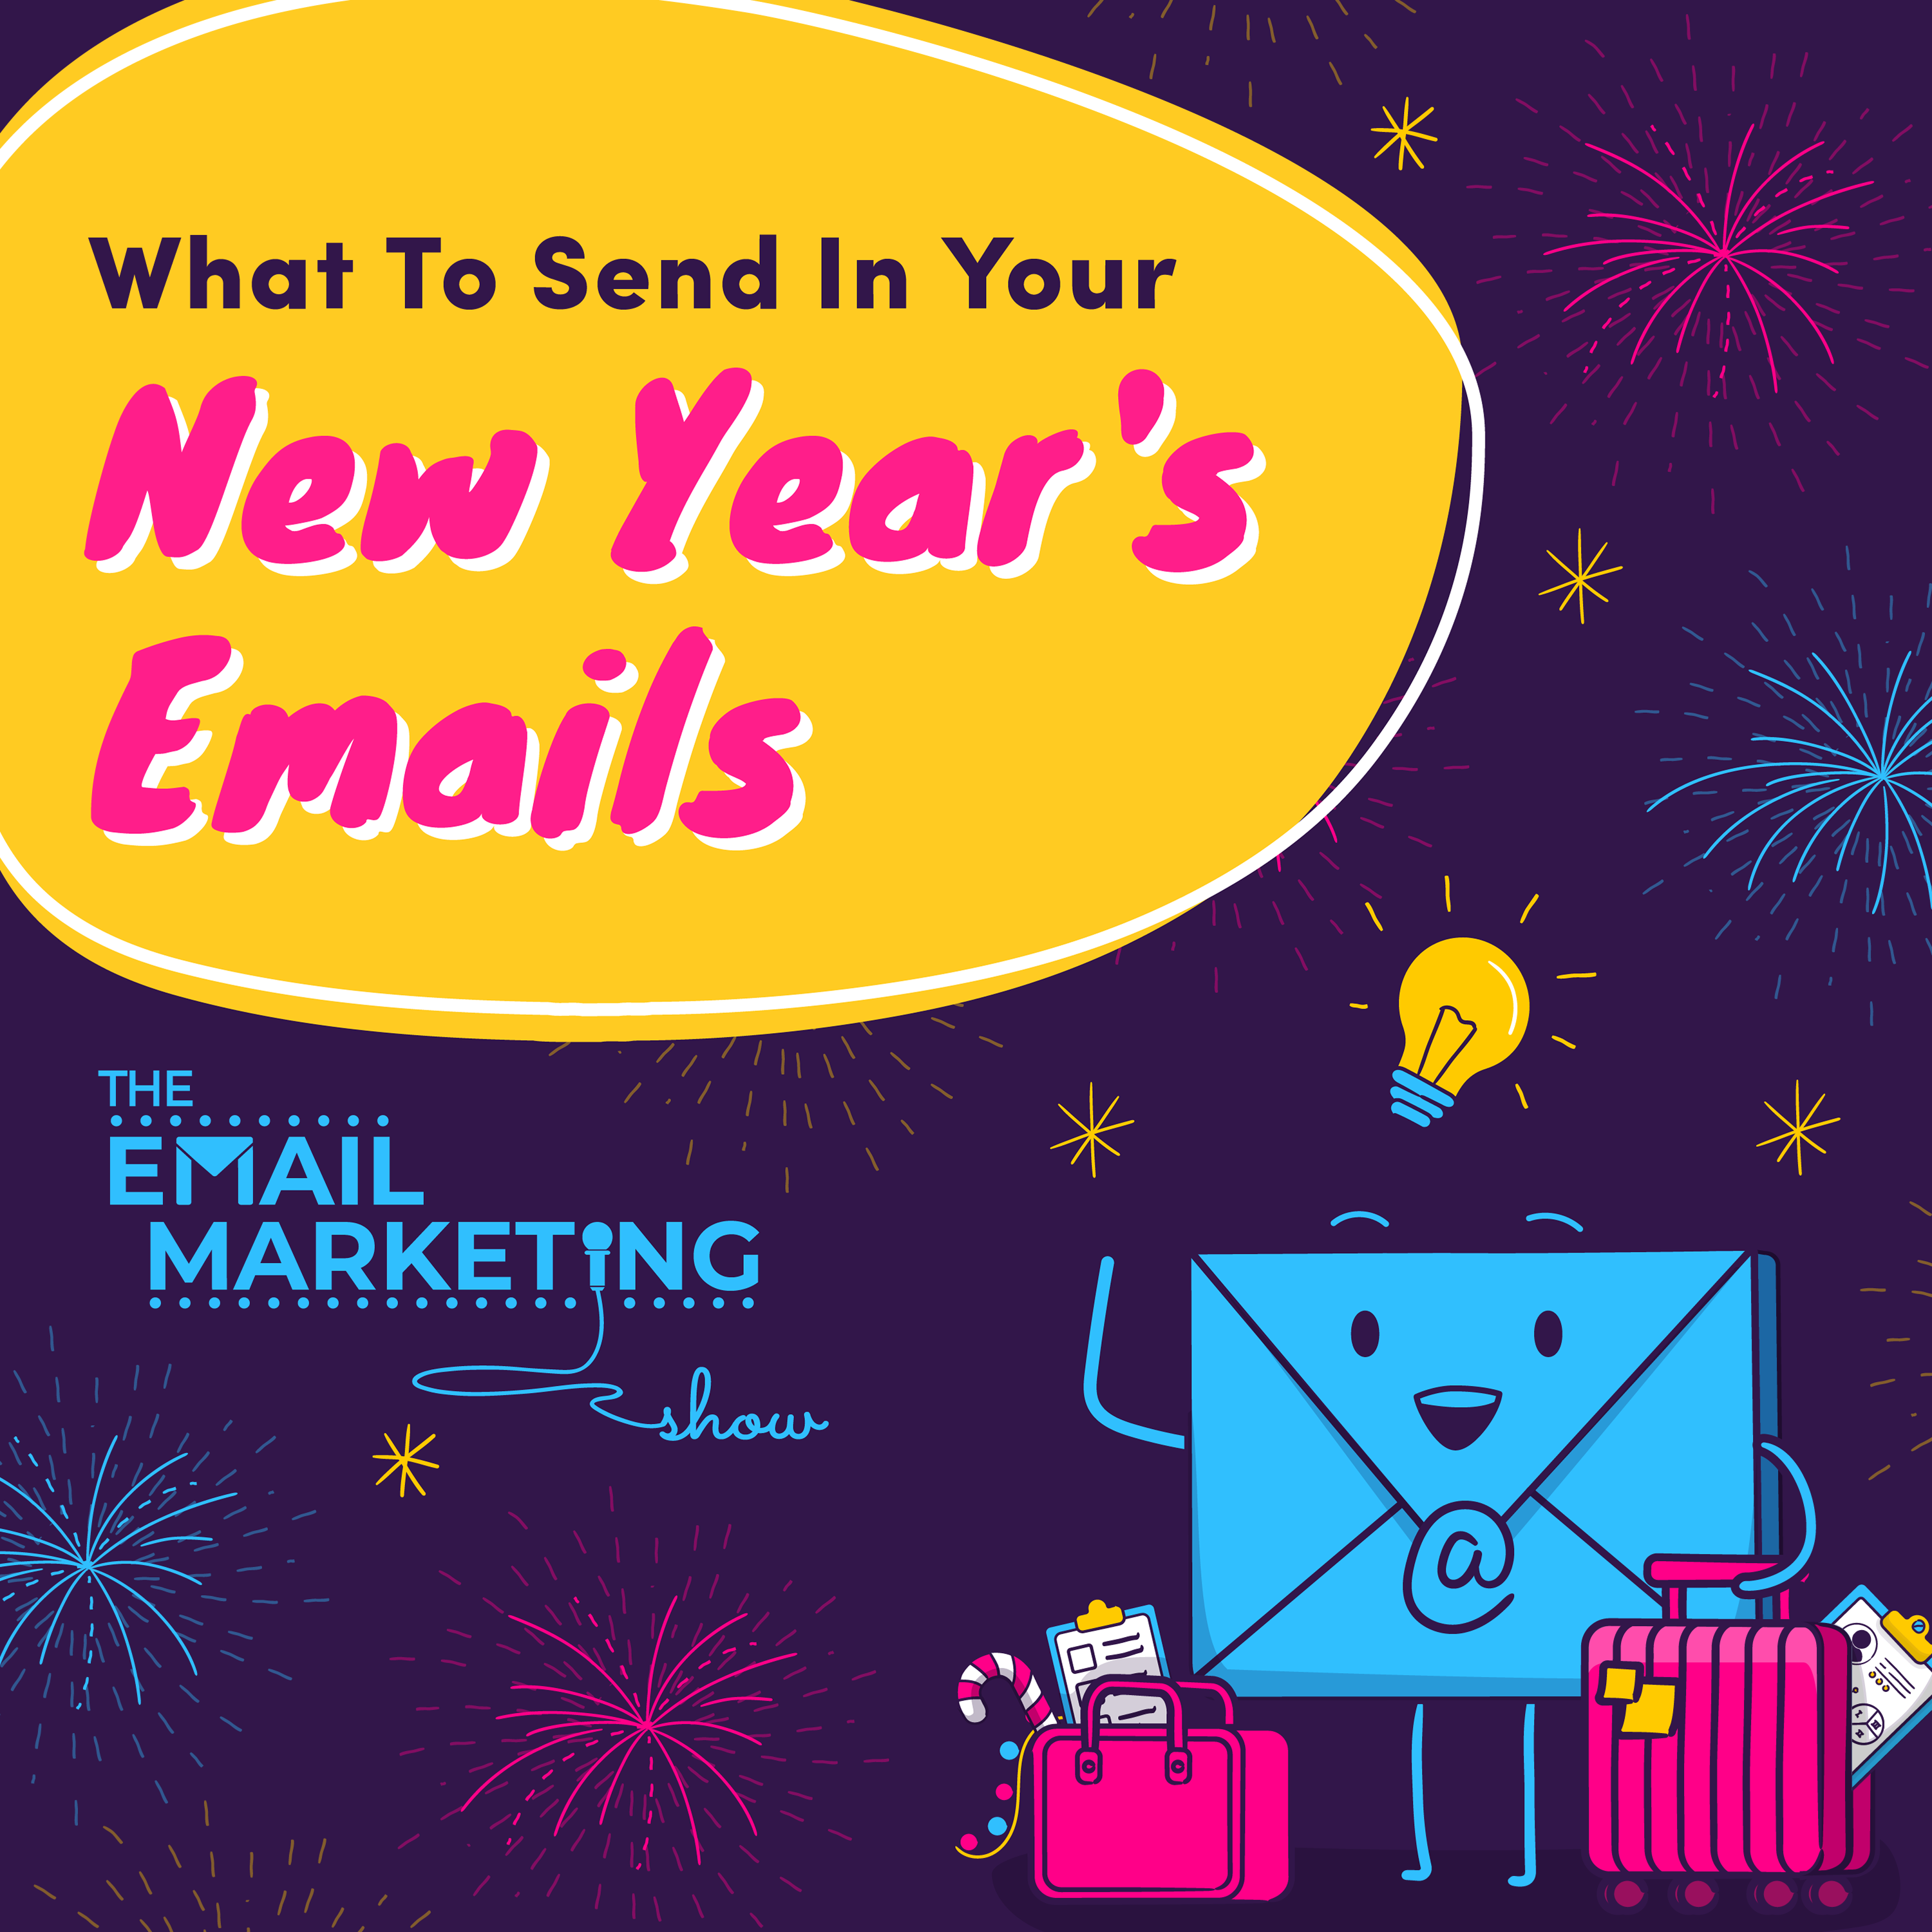 What To Send In Your New Year’s Emails To Get Your Clients Excited About Your Business (And Buy From You)